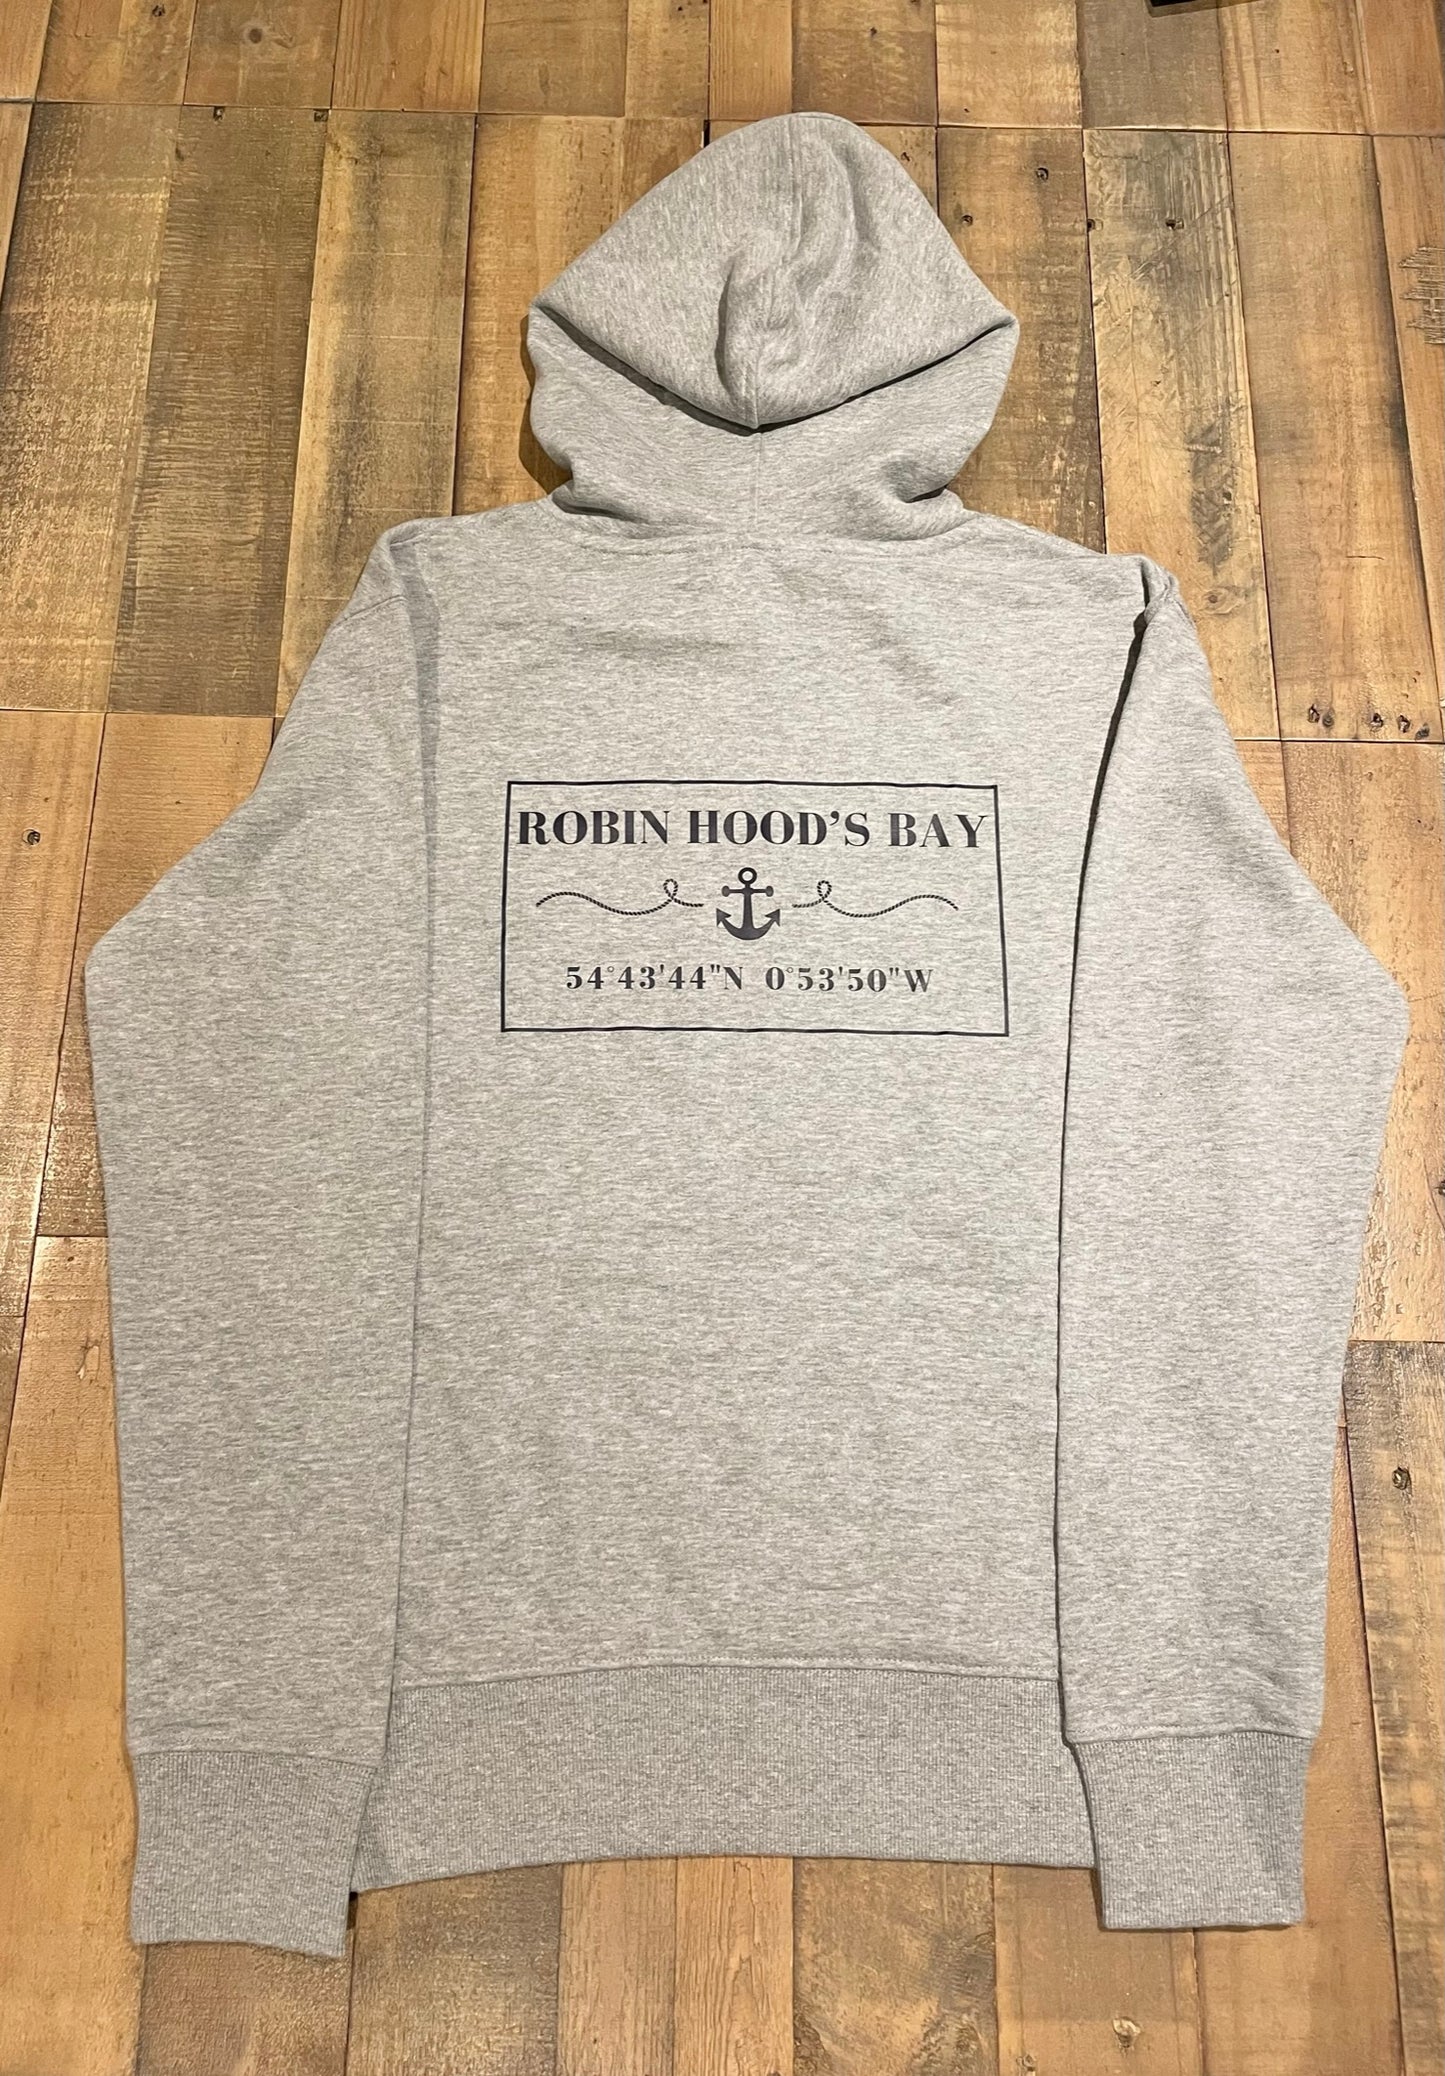 The grey “Robin Hood’s Bay” men’s hoodie from the bay company. 